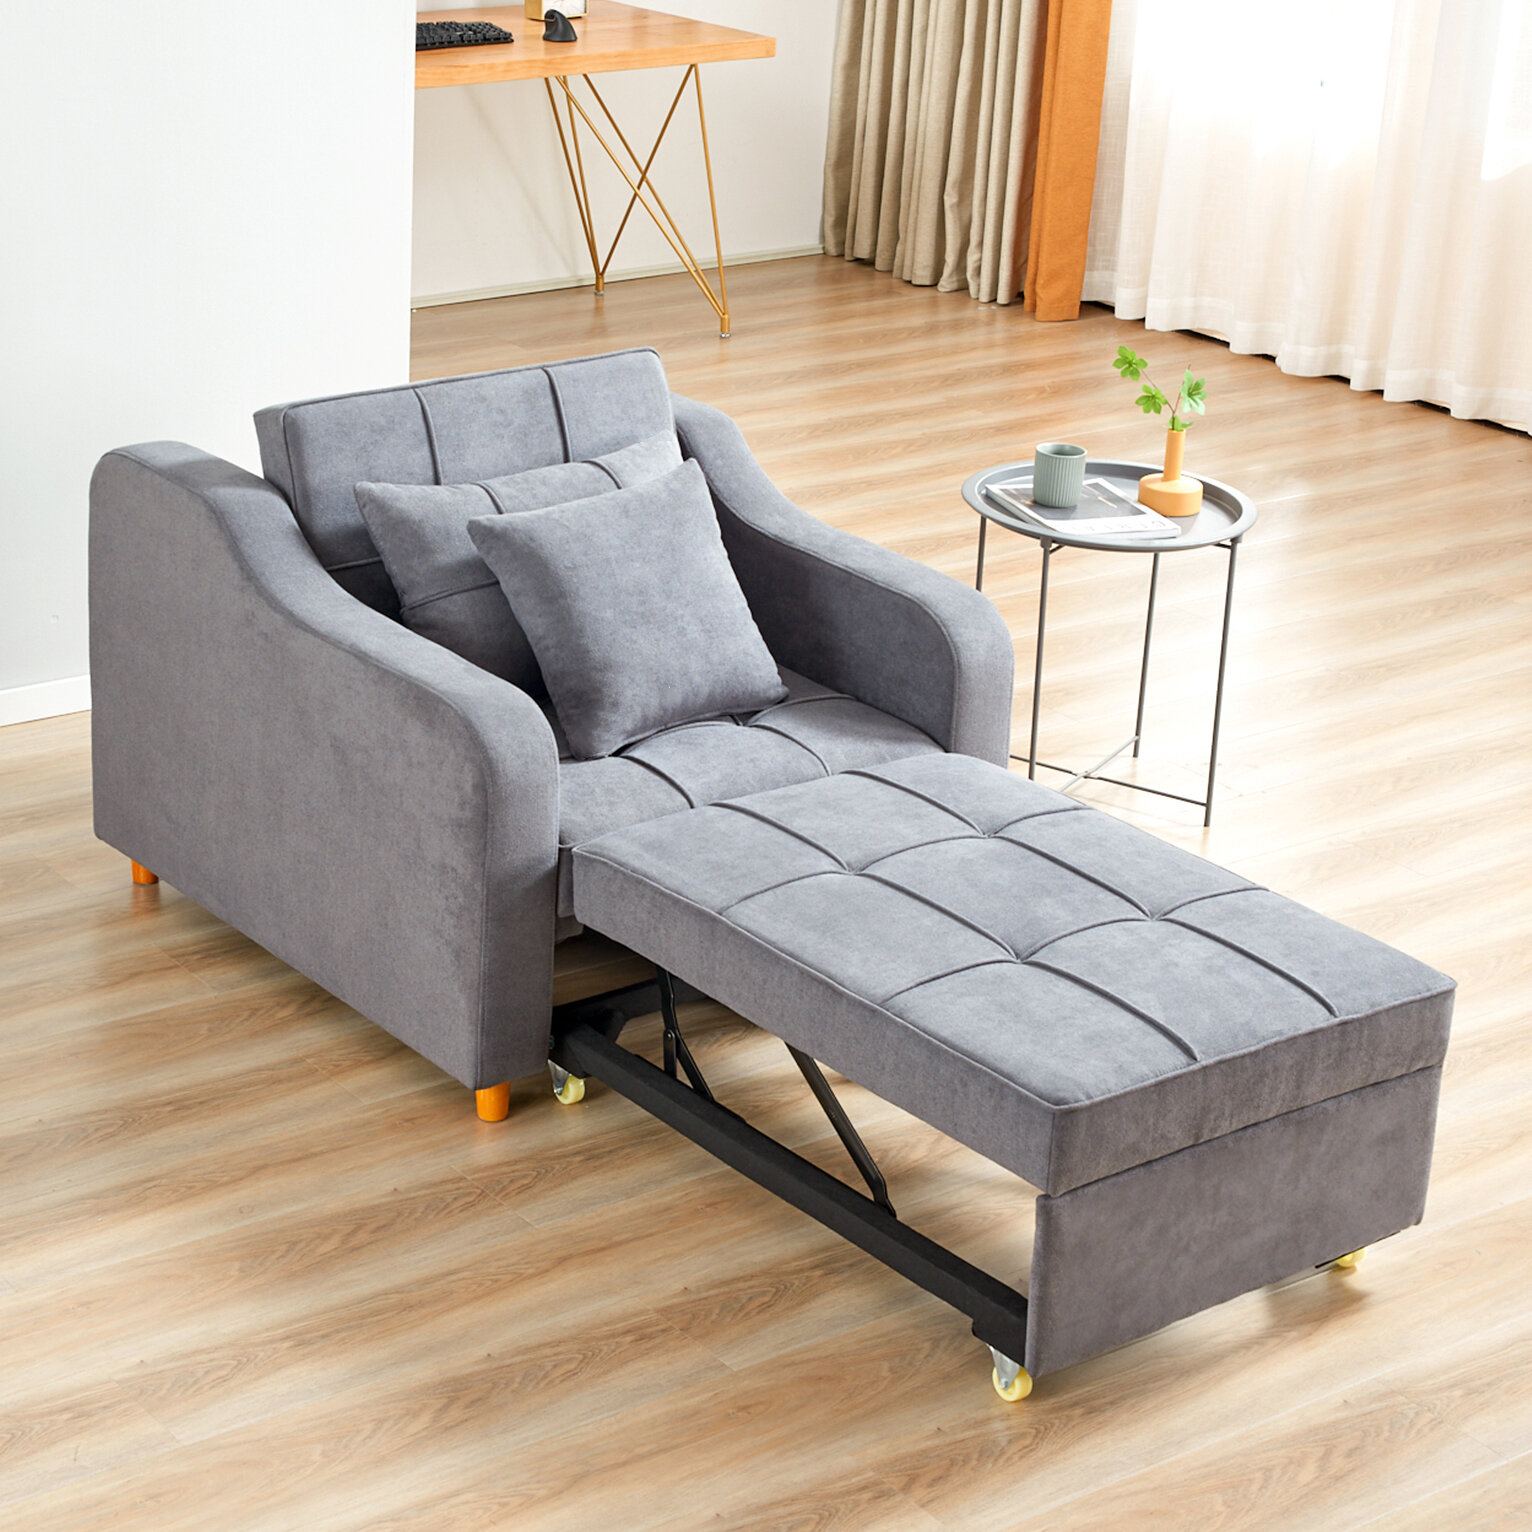 CONVERTIBLE SOFA Bed Lounger Futon Couch Sleeper Loveseat Chaises Home Furniture